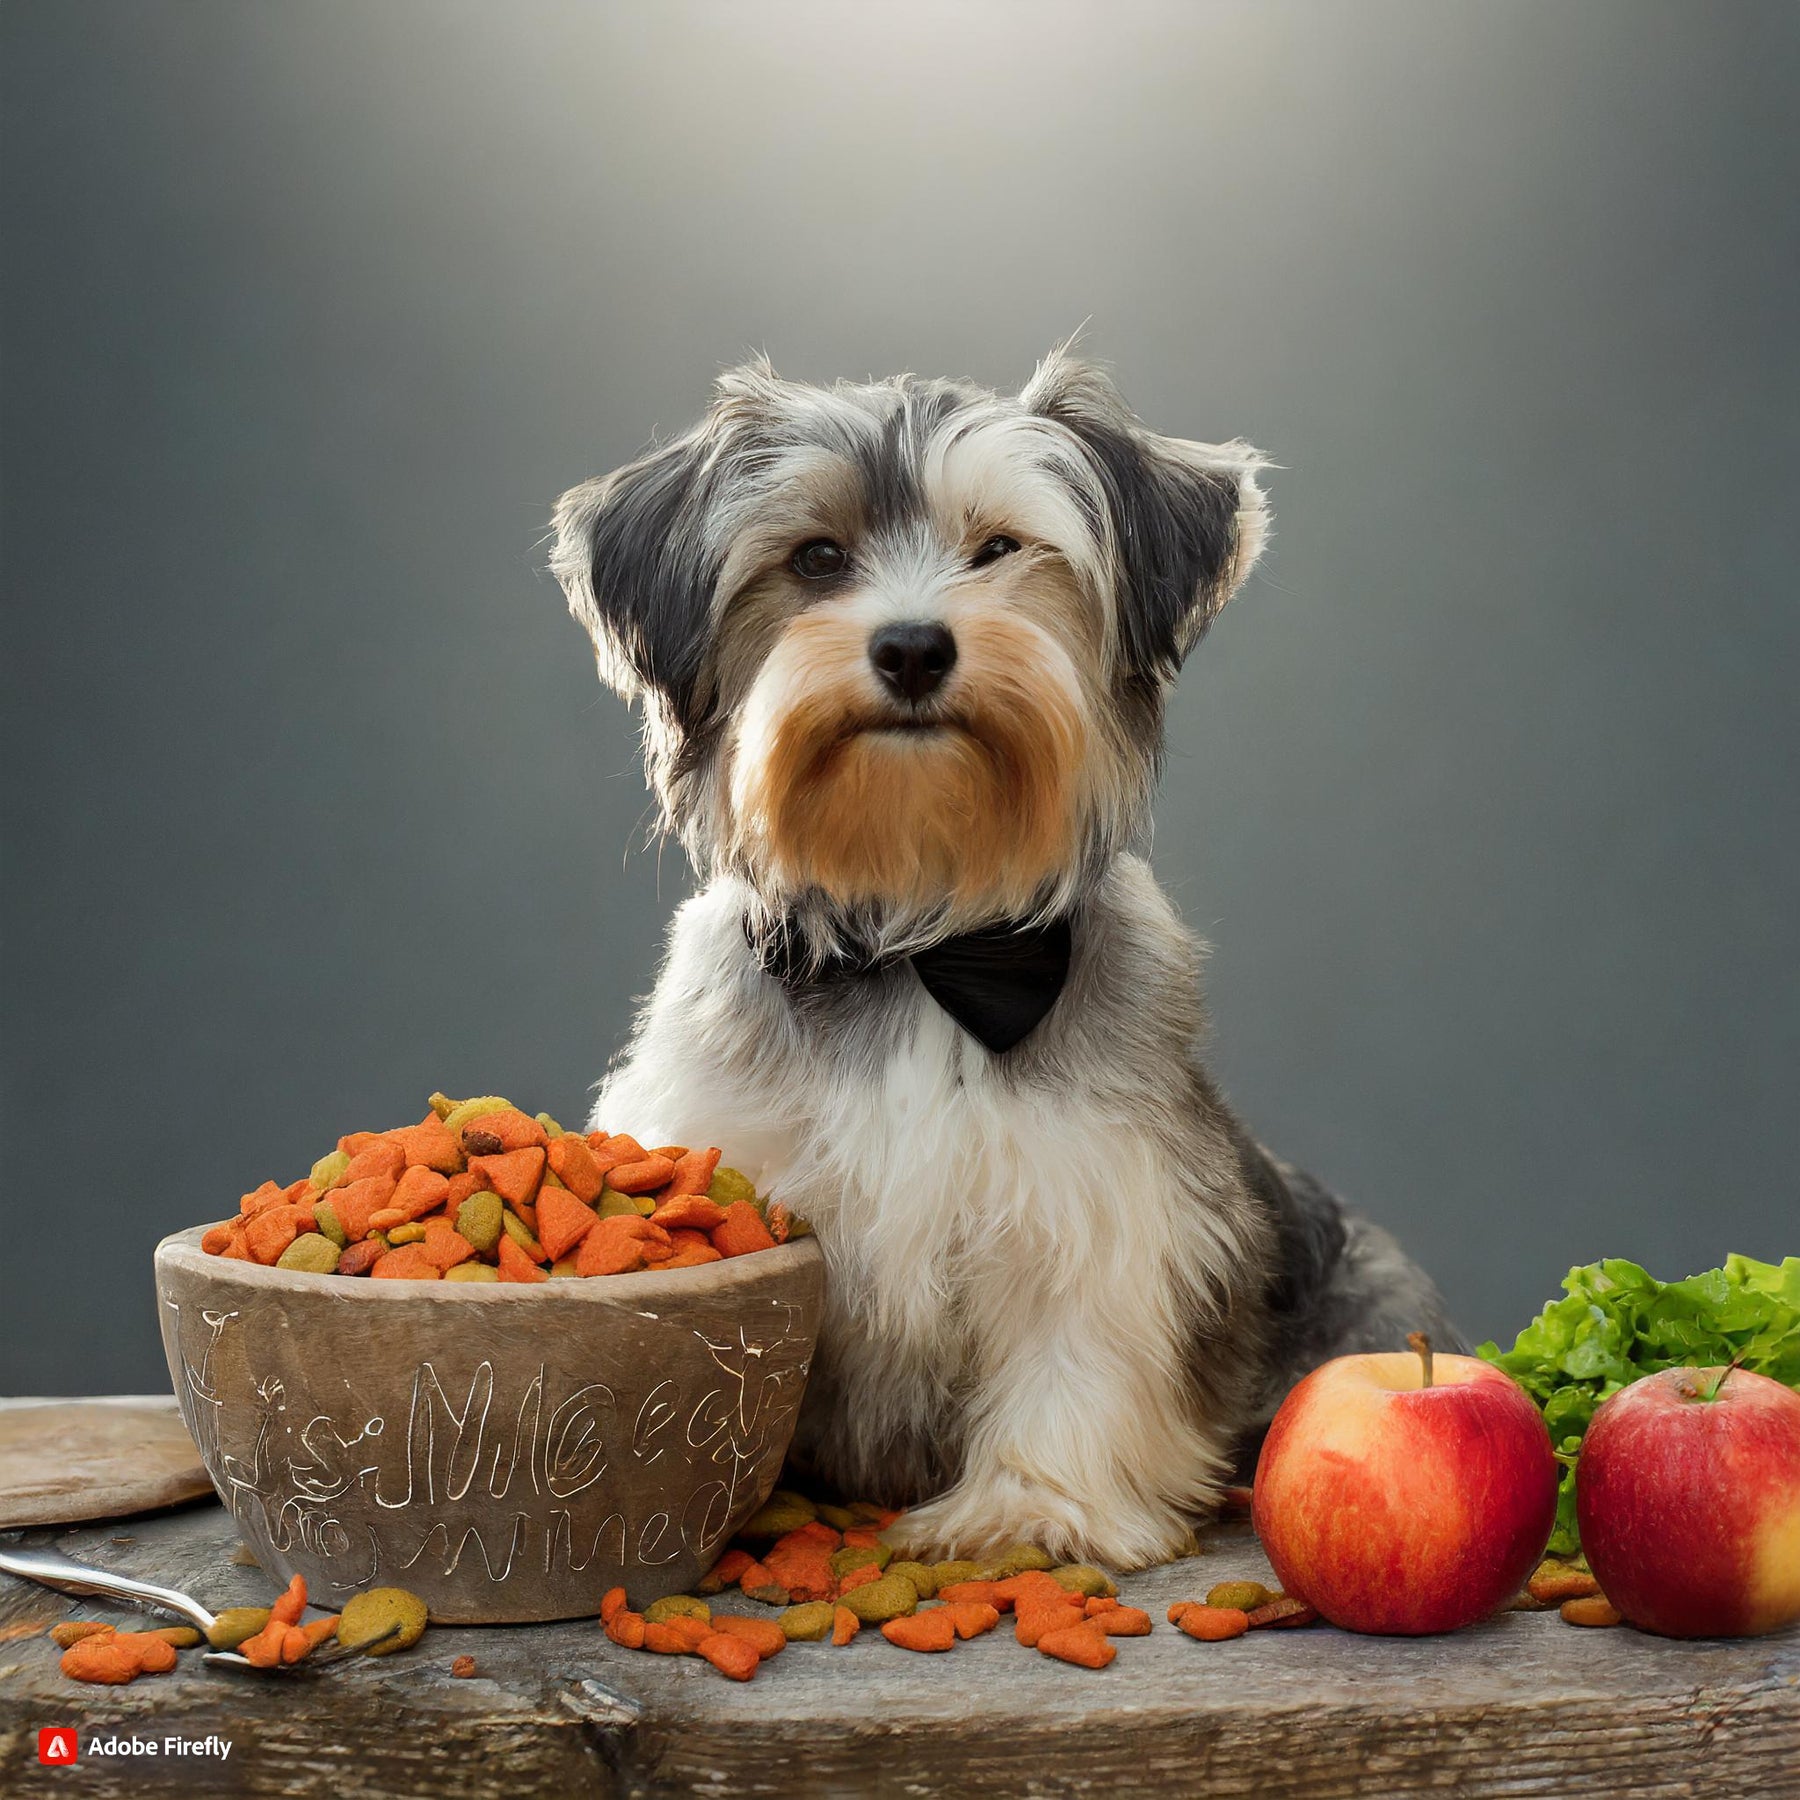 Supercharge Your Pet's Health: Top 10 Food Choices They'll Love